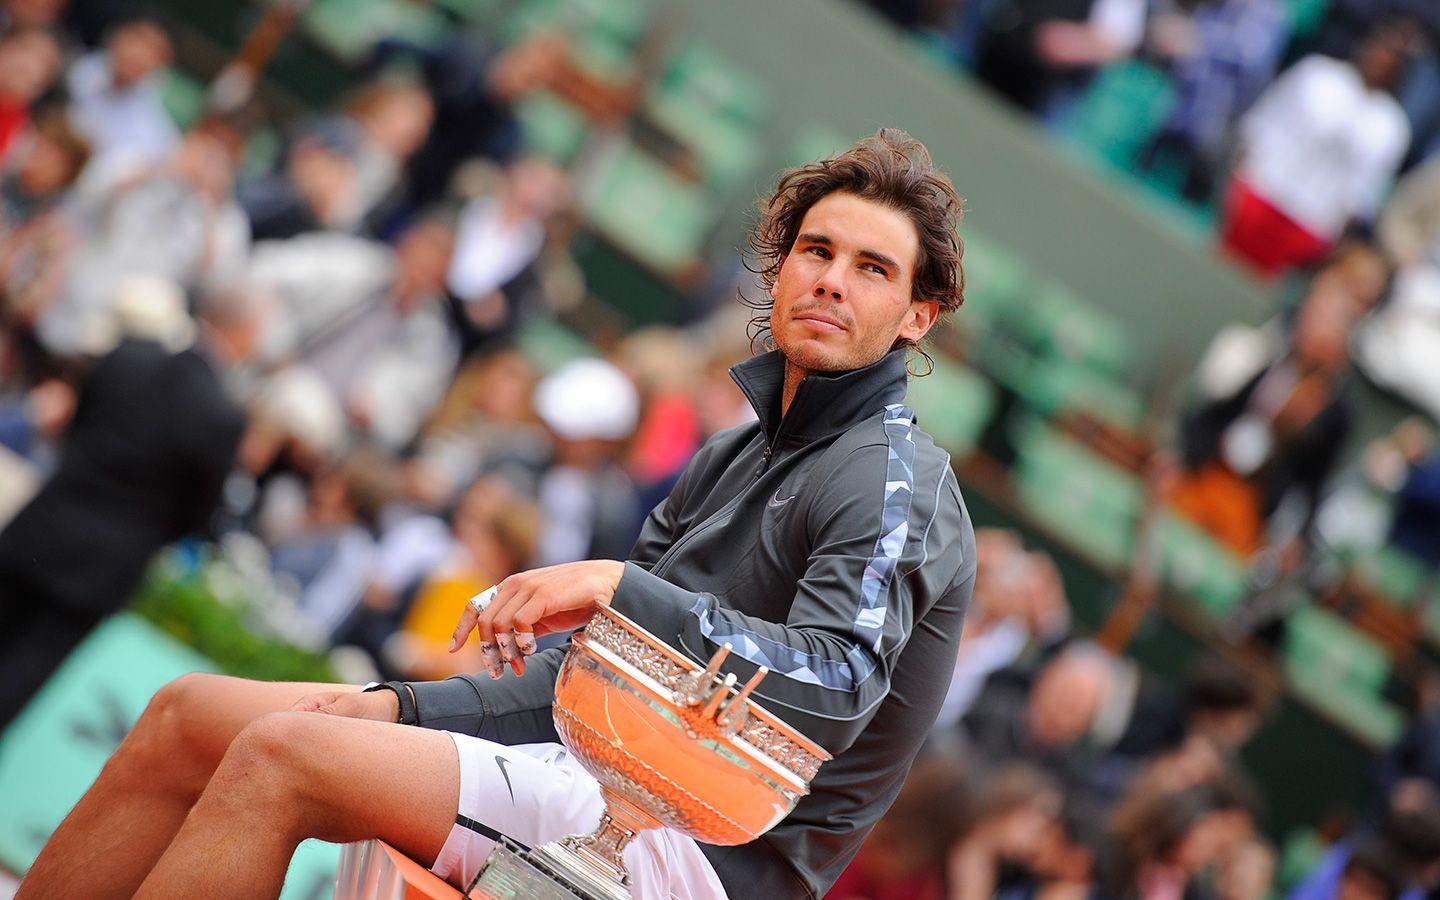 Records Rafa could Make his own at French Open